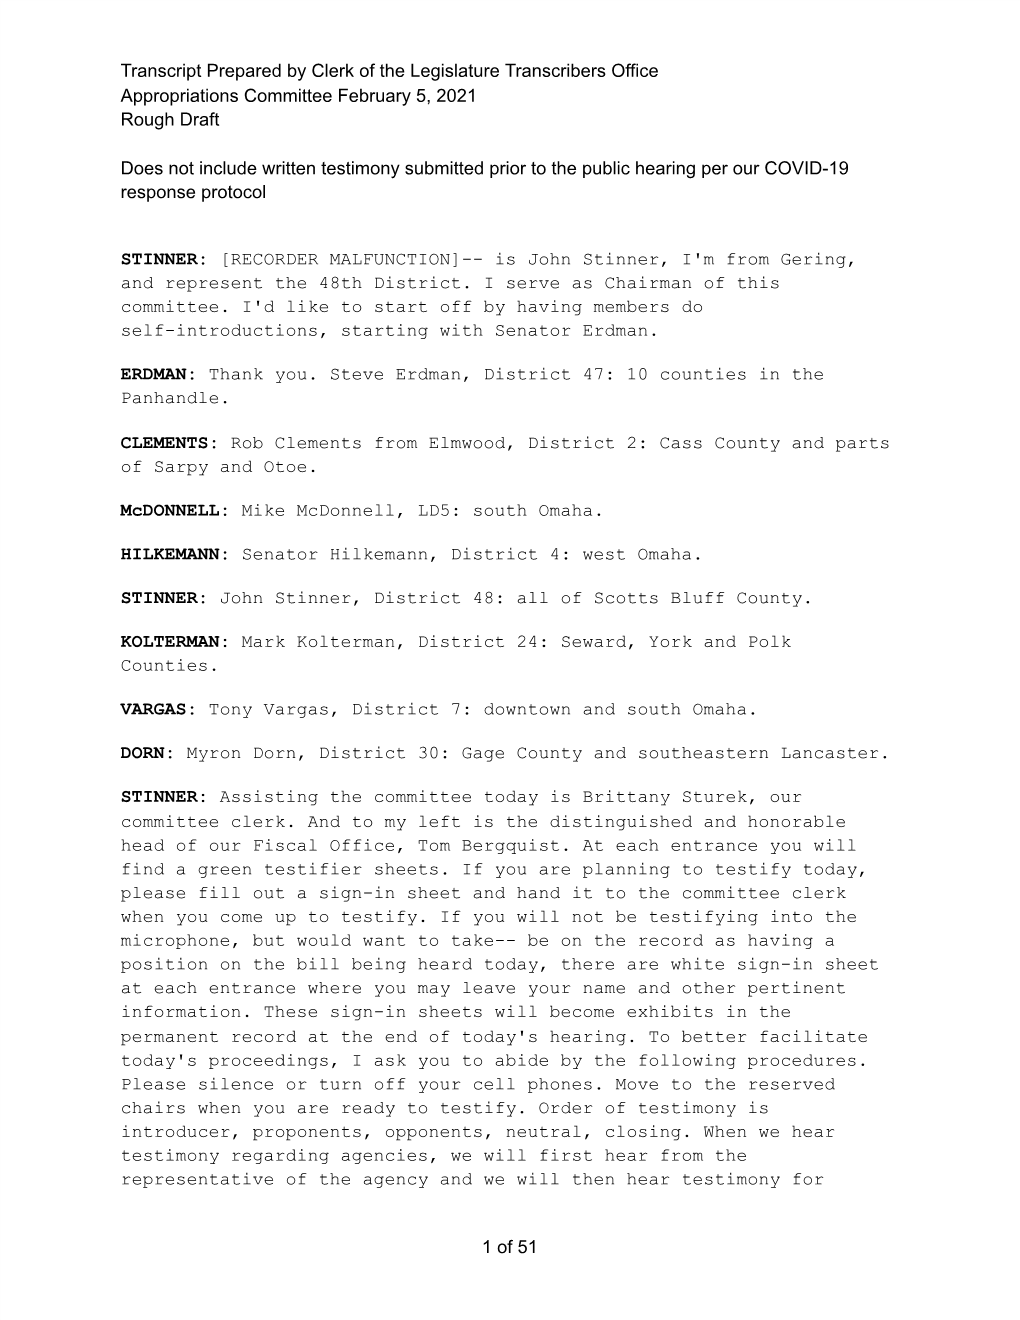 Transcript Prepared by Clerk of the Legislature Transcribers Office Appropriations Committee February 5, 2021 Rough Draft